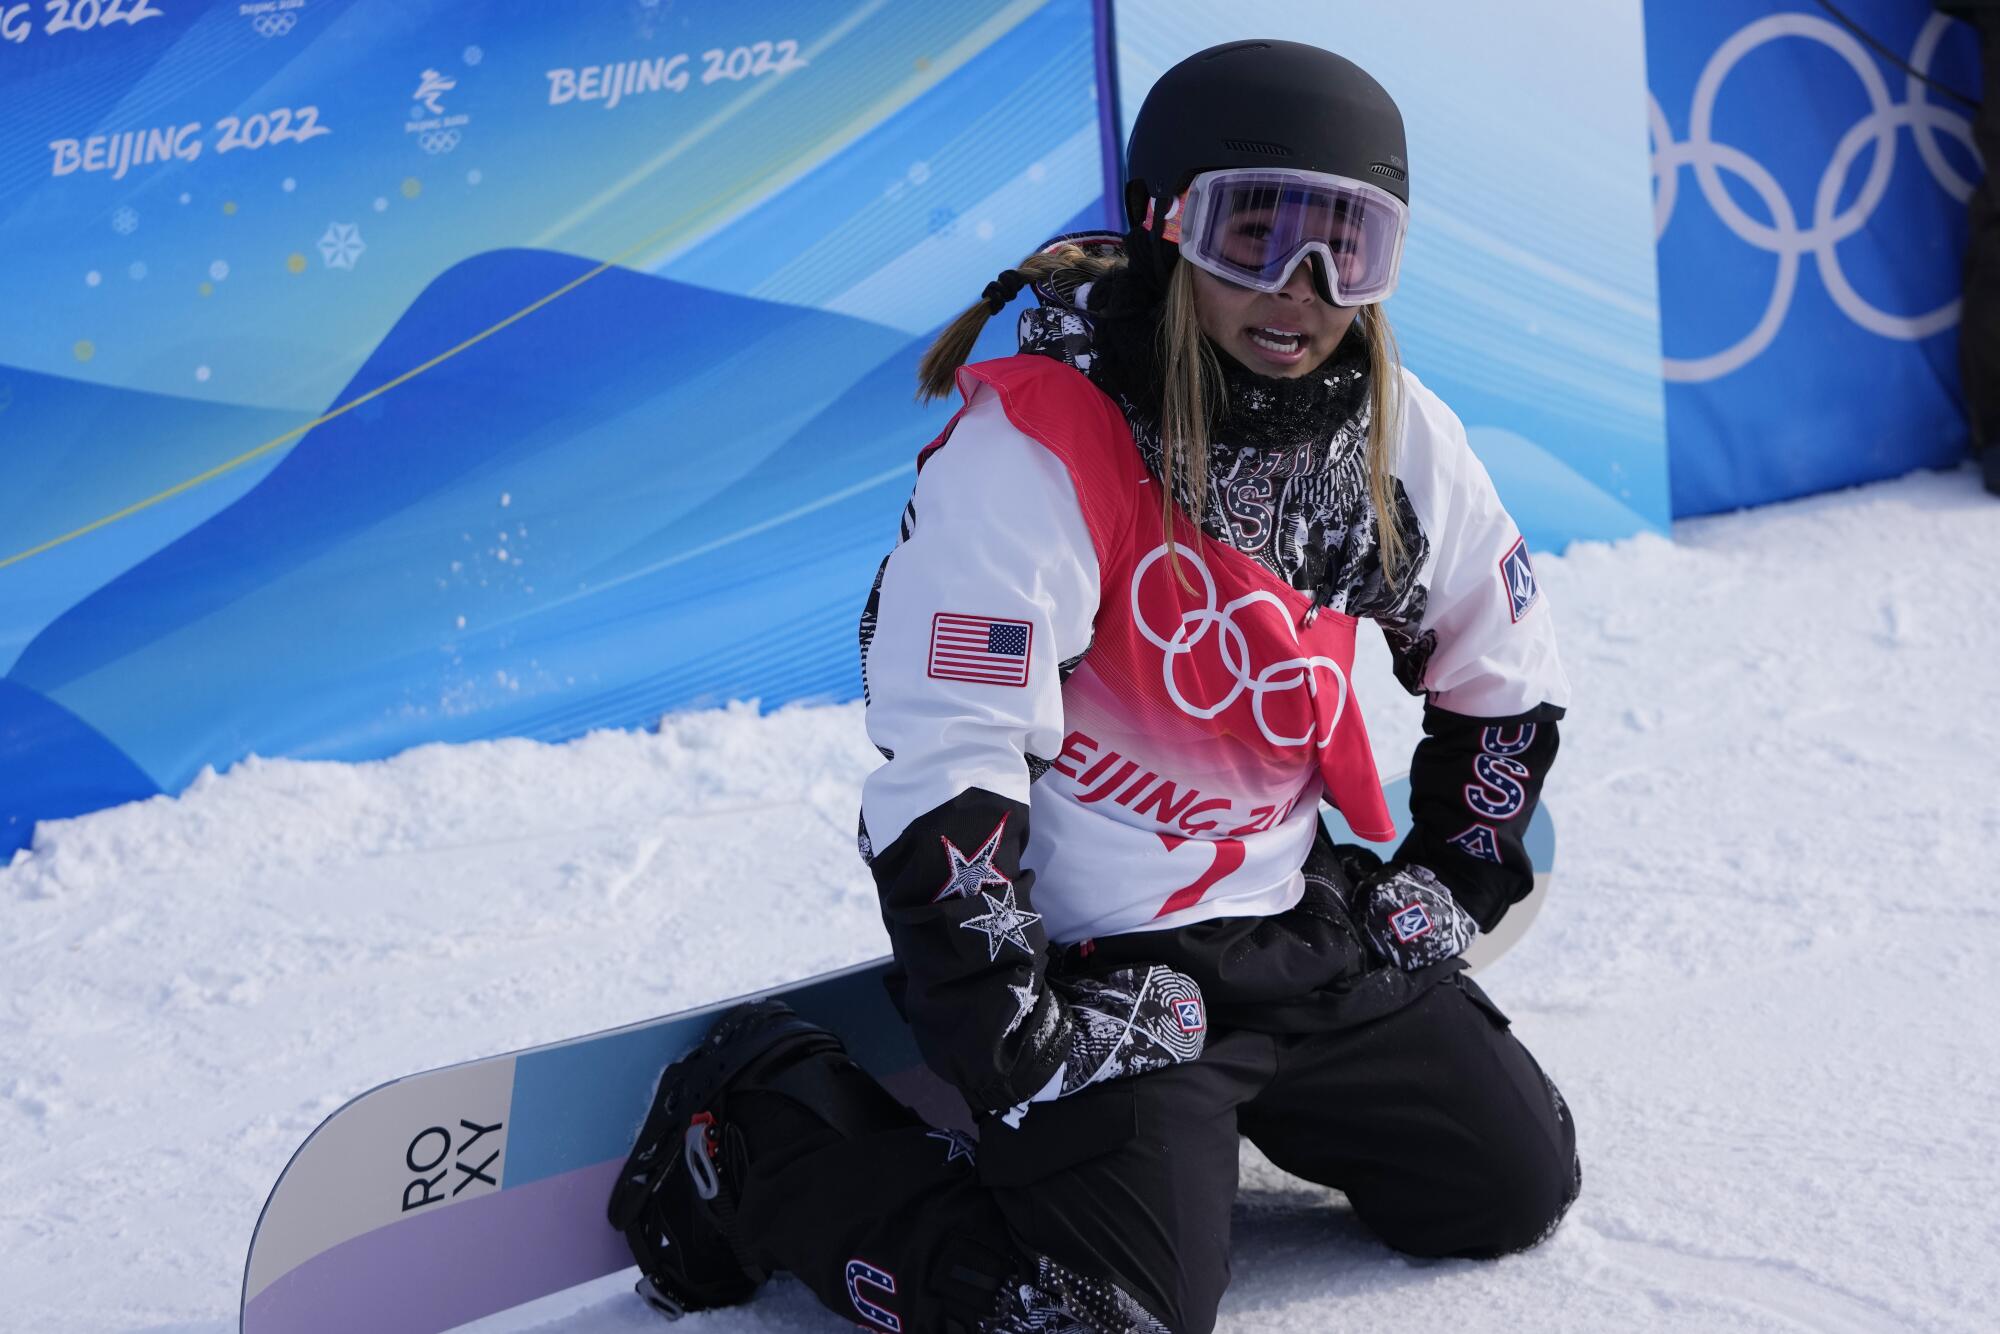 Chloe Kim sits on her knees following a run in the women's halfpipe finals at the 2022 Olympics